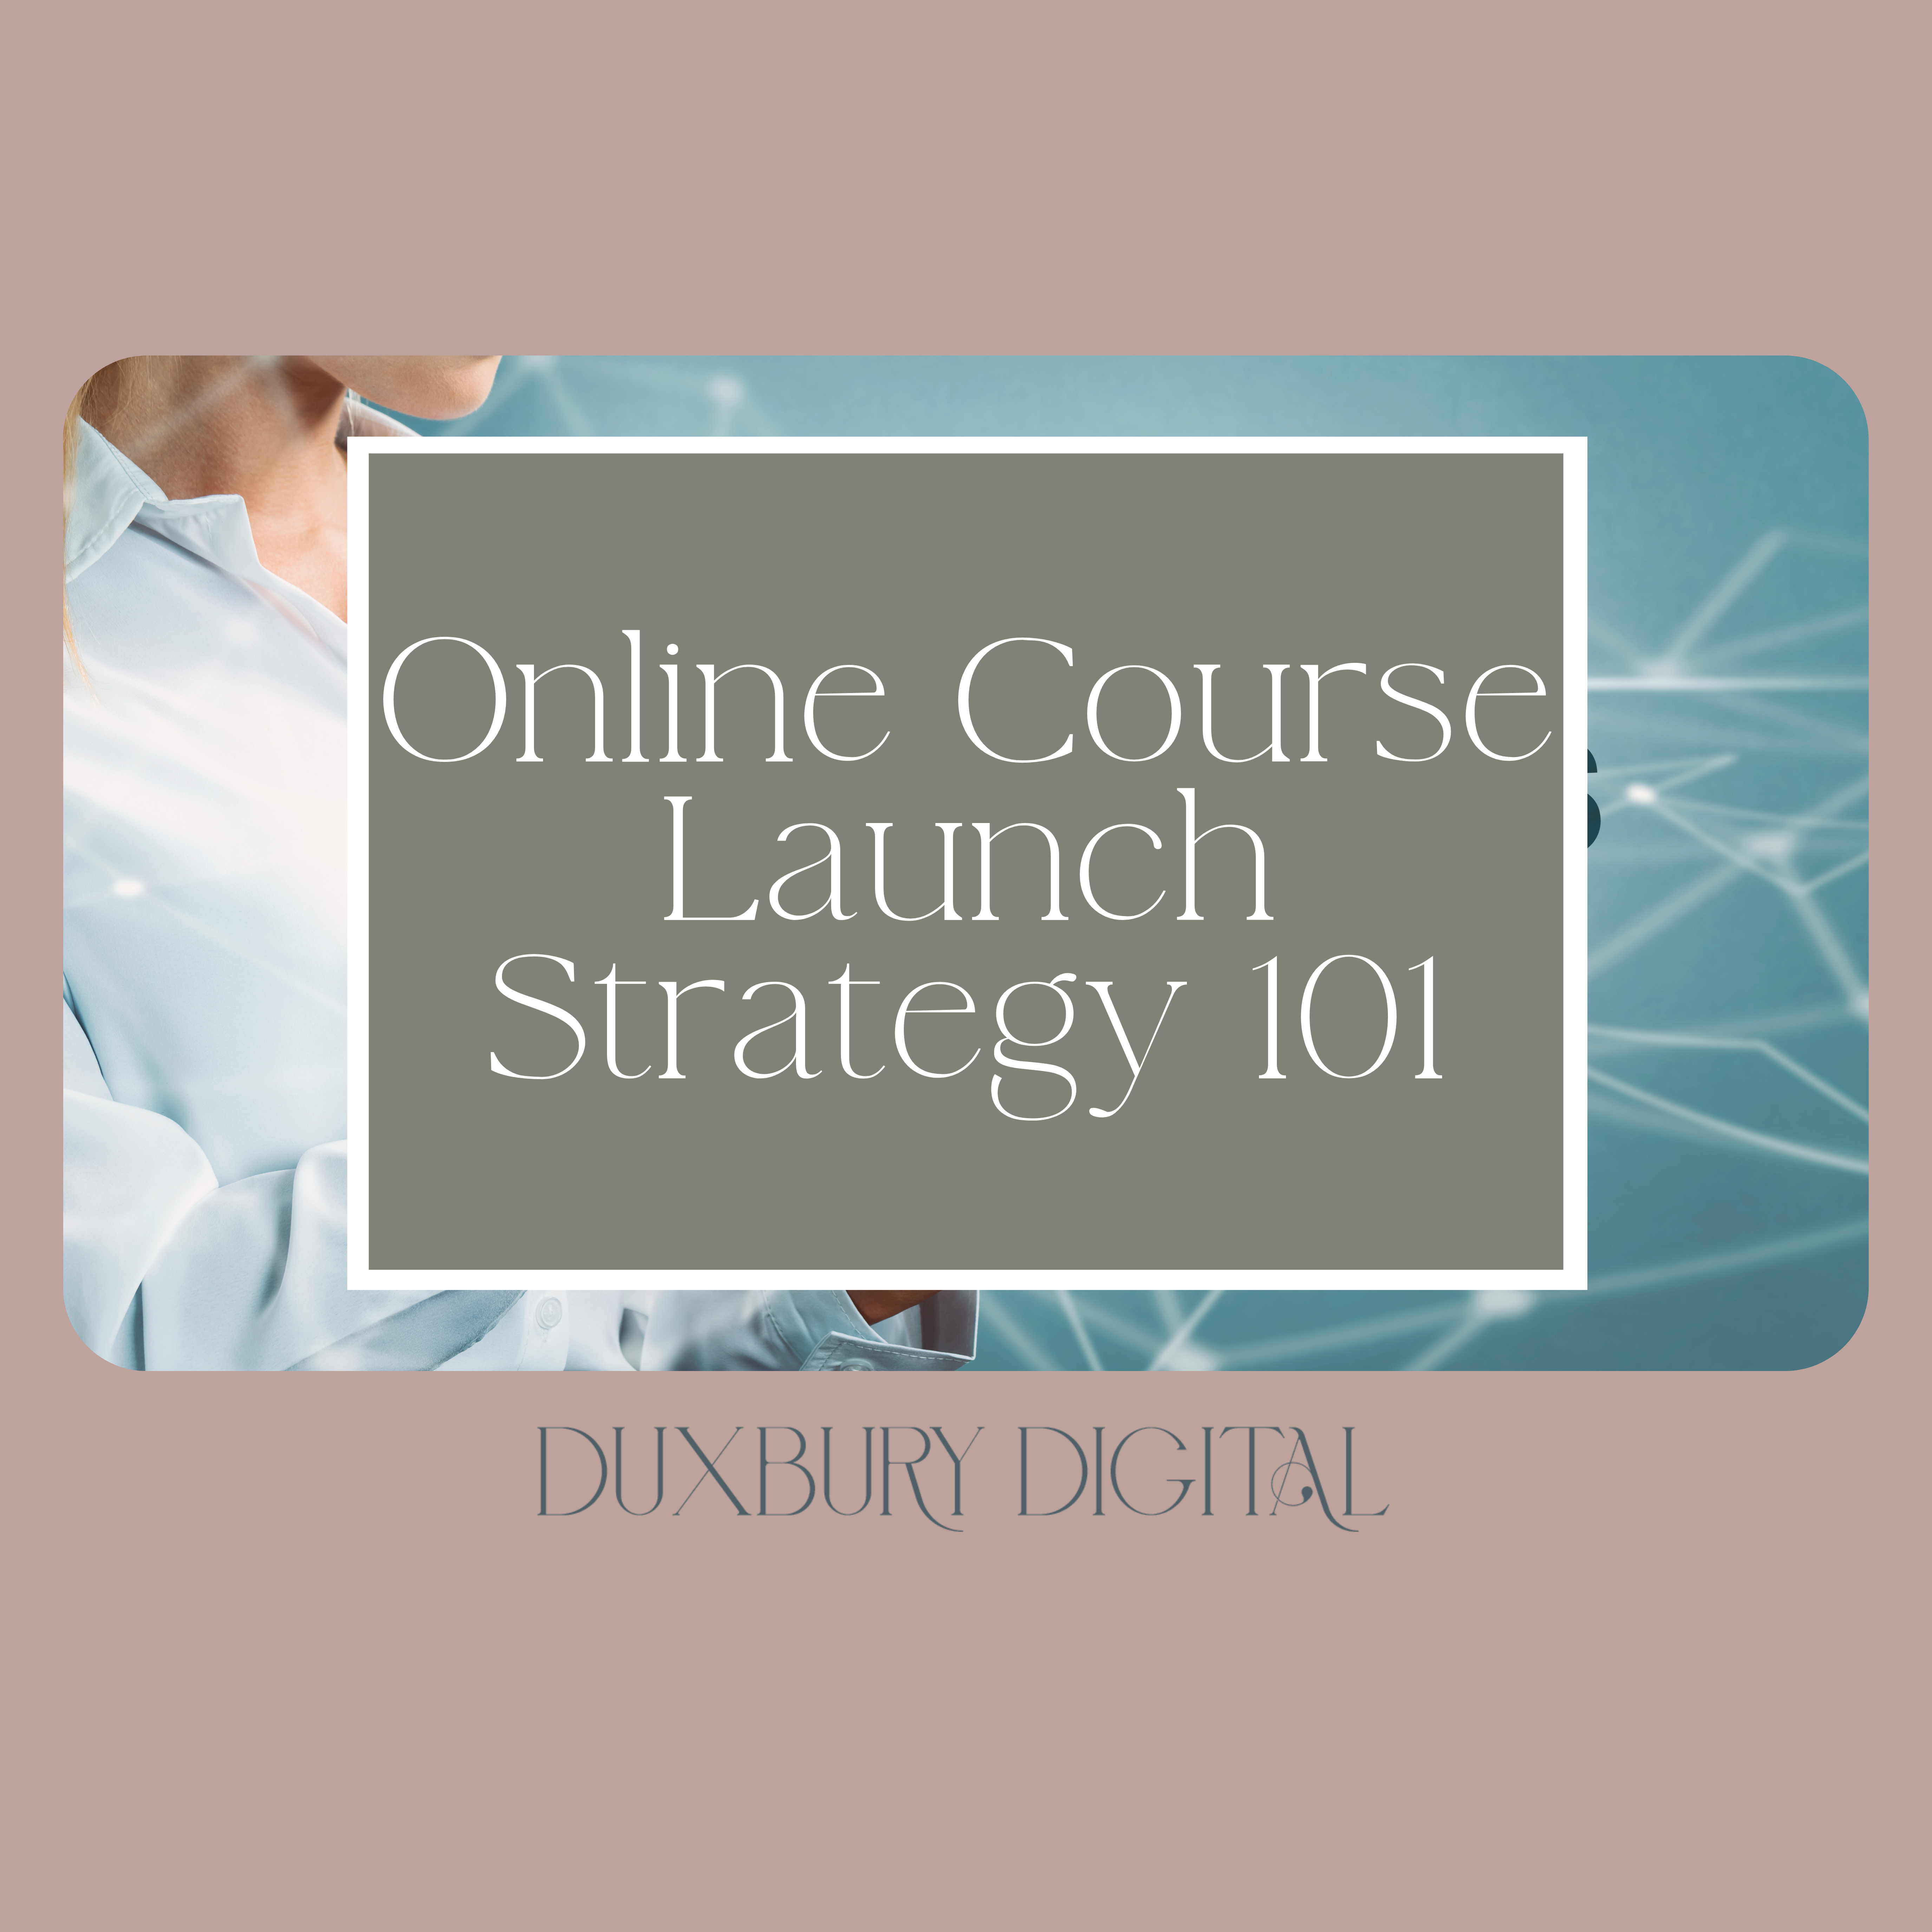 Online Course Launch Strategy 101